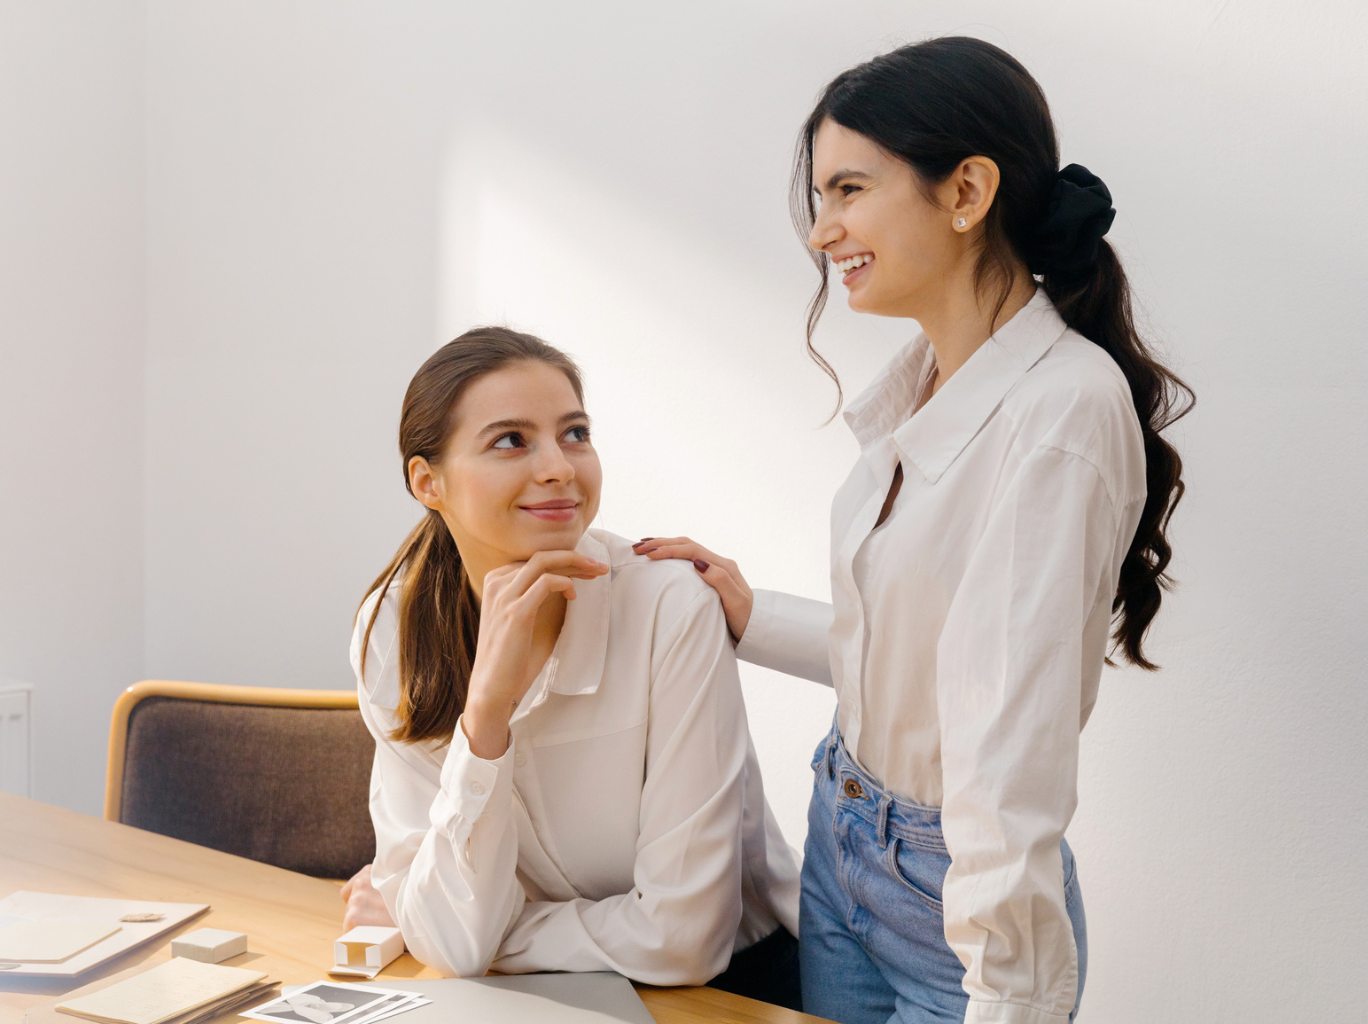 Two women working together deciding between co-founder vs. solo founder